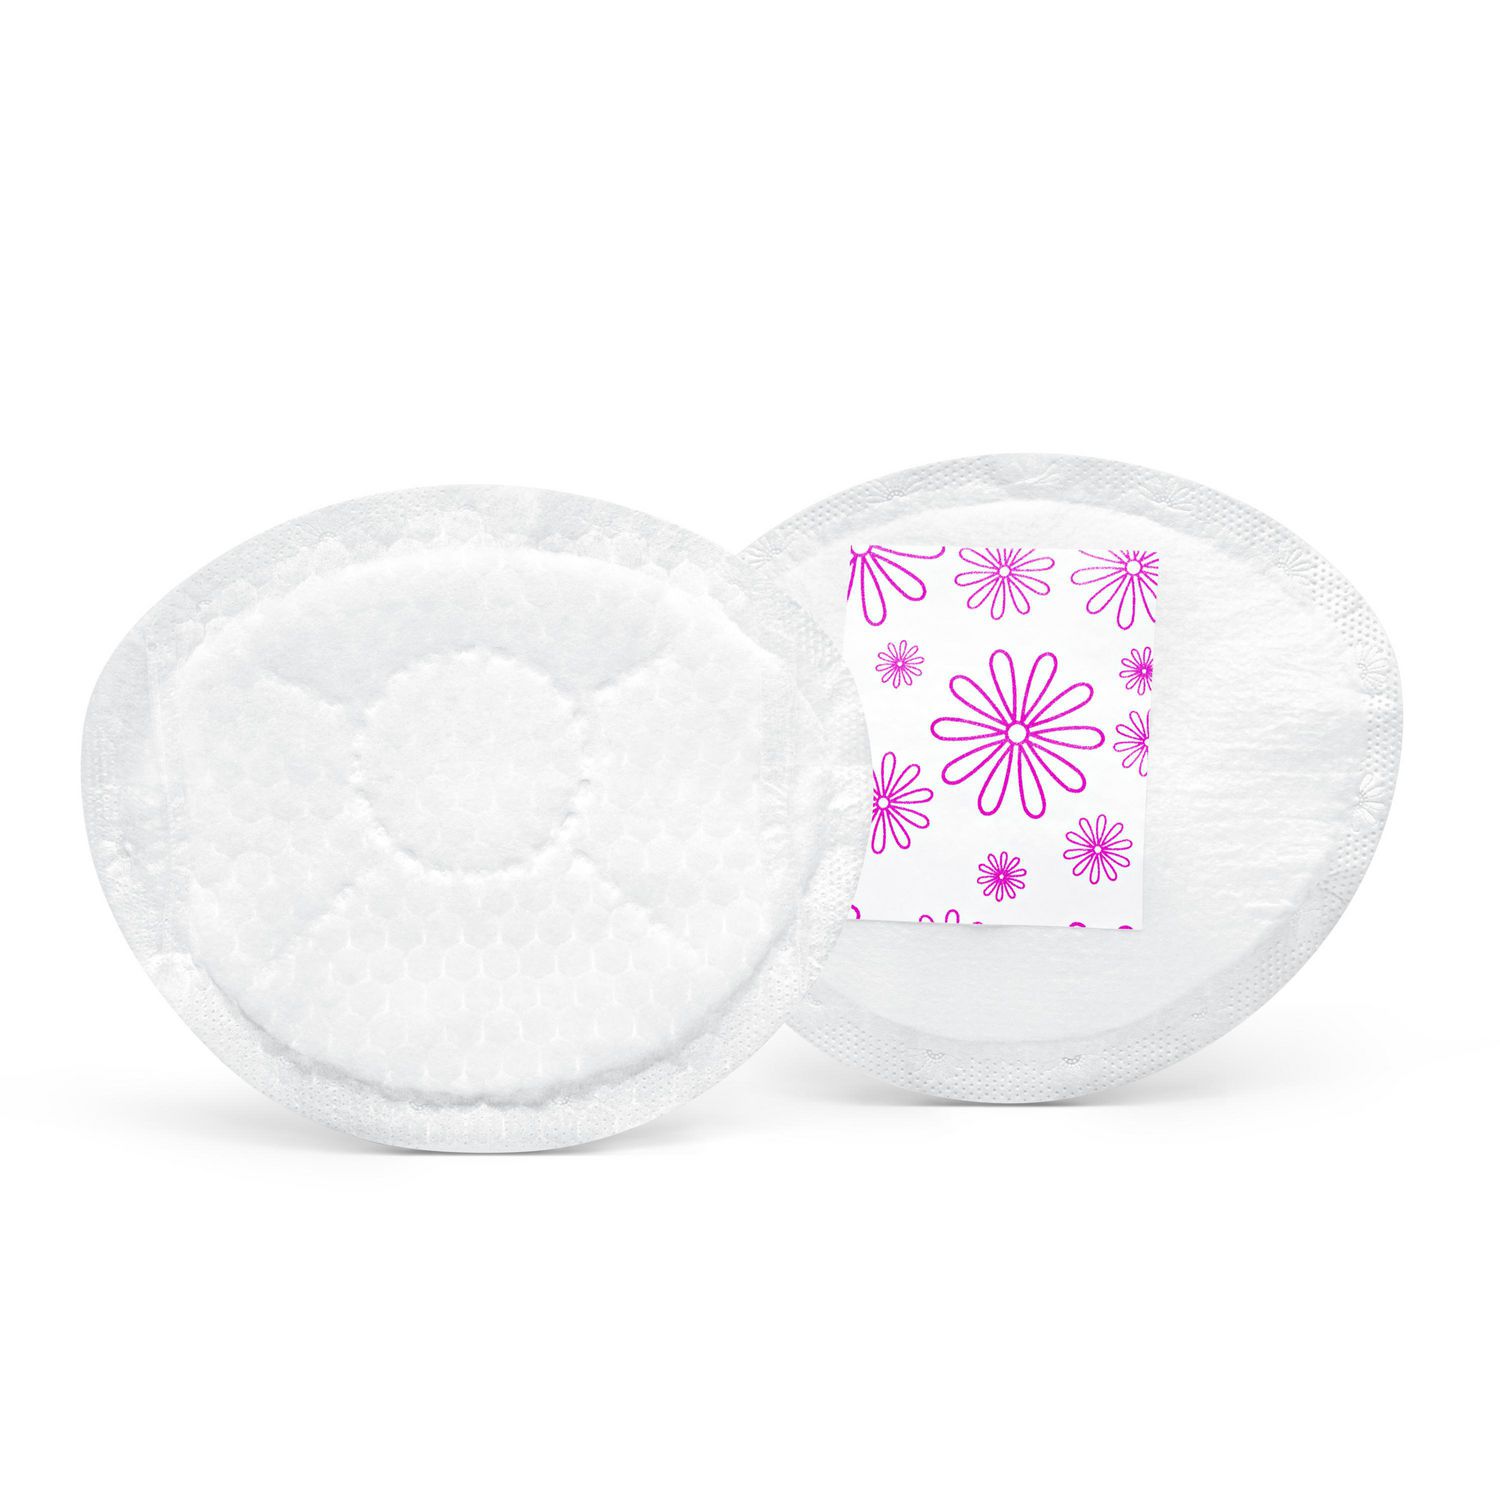 Buy Pee Safe Disposable Breast Pads (Pack Of 24) Online At Best Price